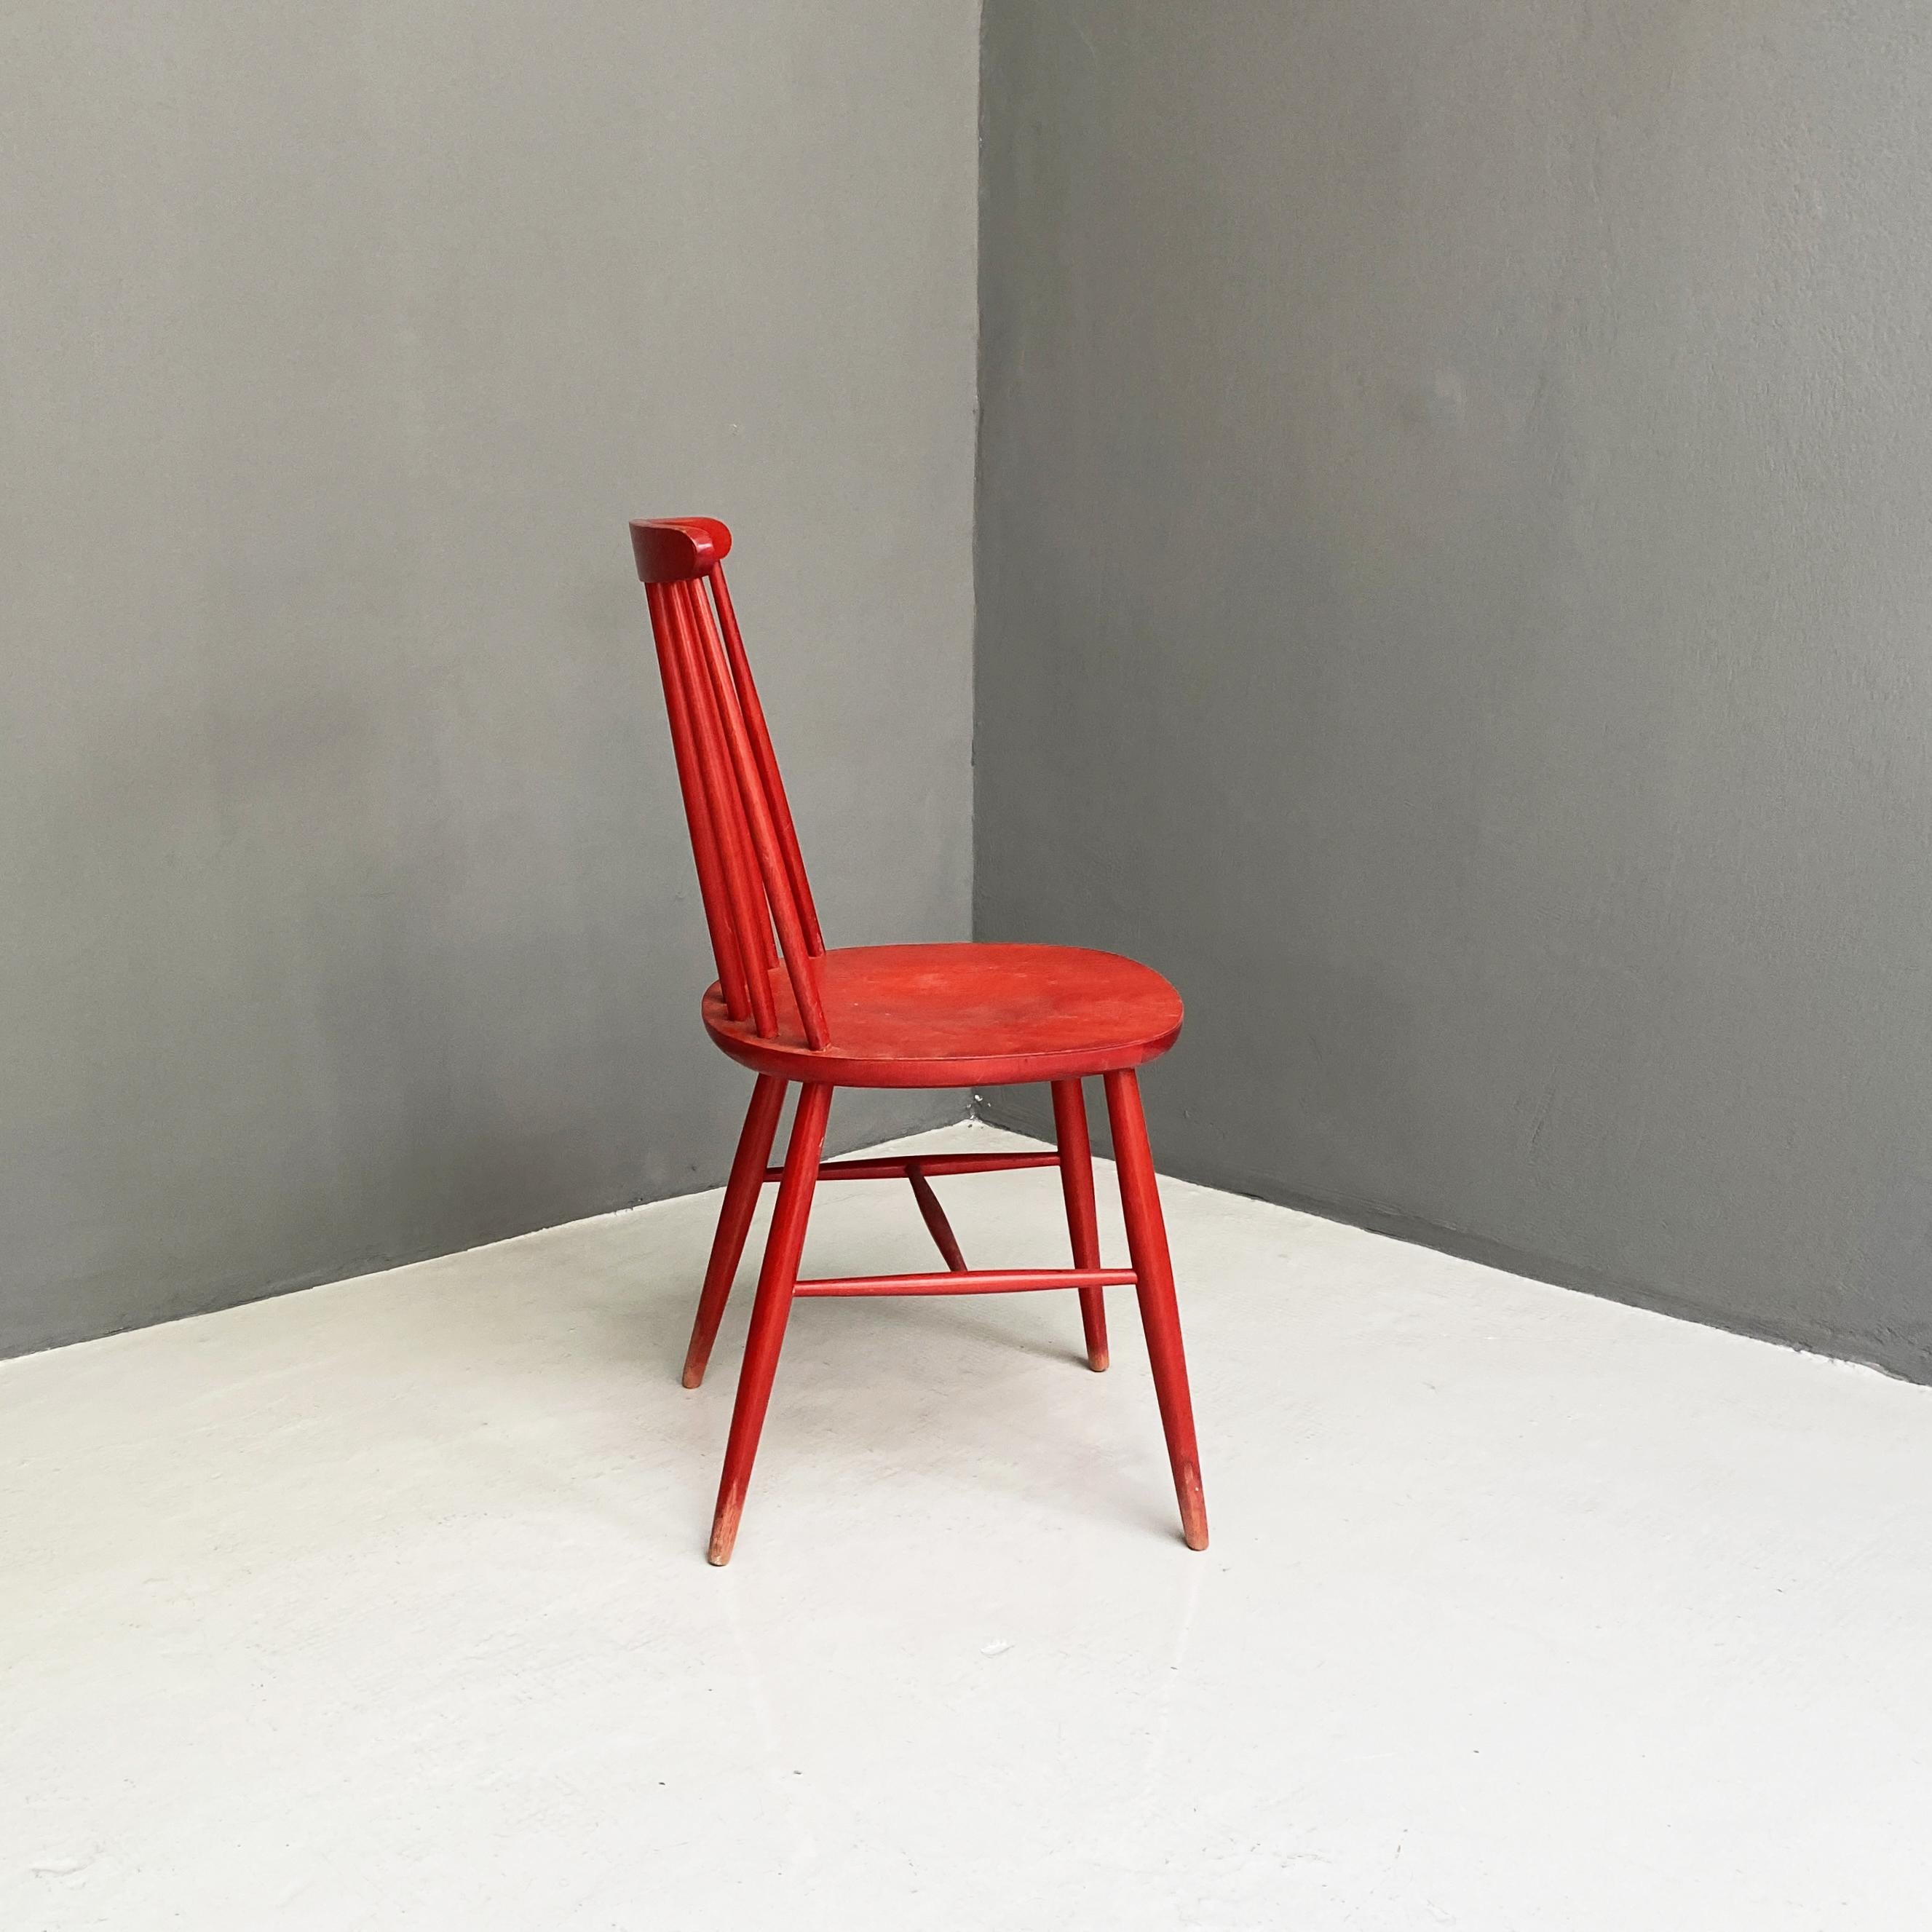 European Mid-Century Modern Northern Europe Red Wooden Chair, 1960s For Sale